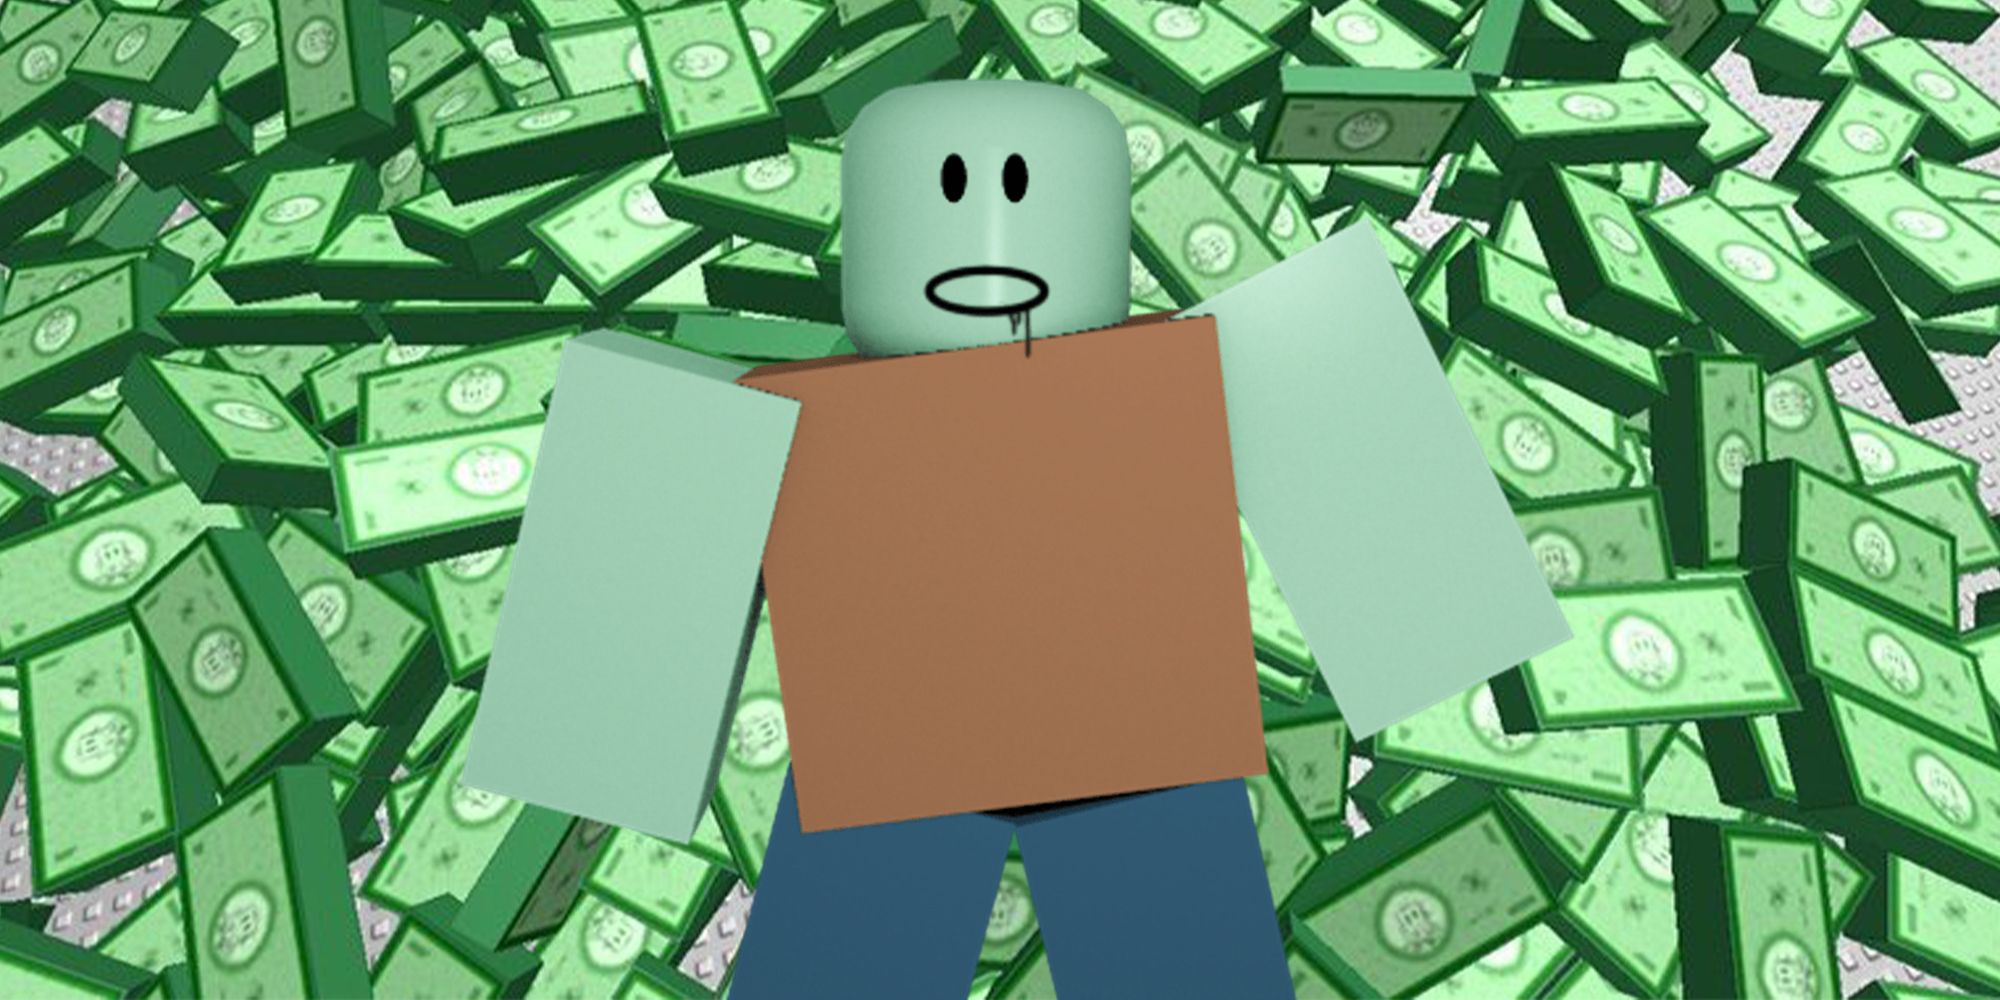 How To Buy Free Robux In Roblox